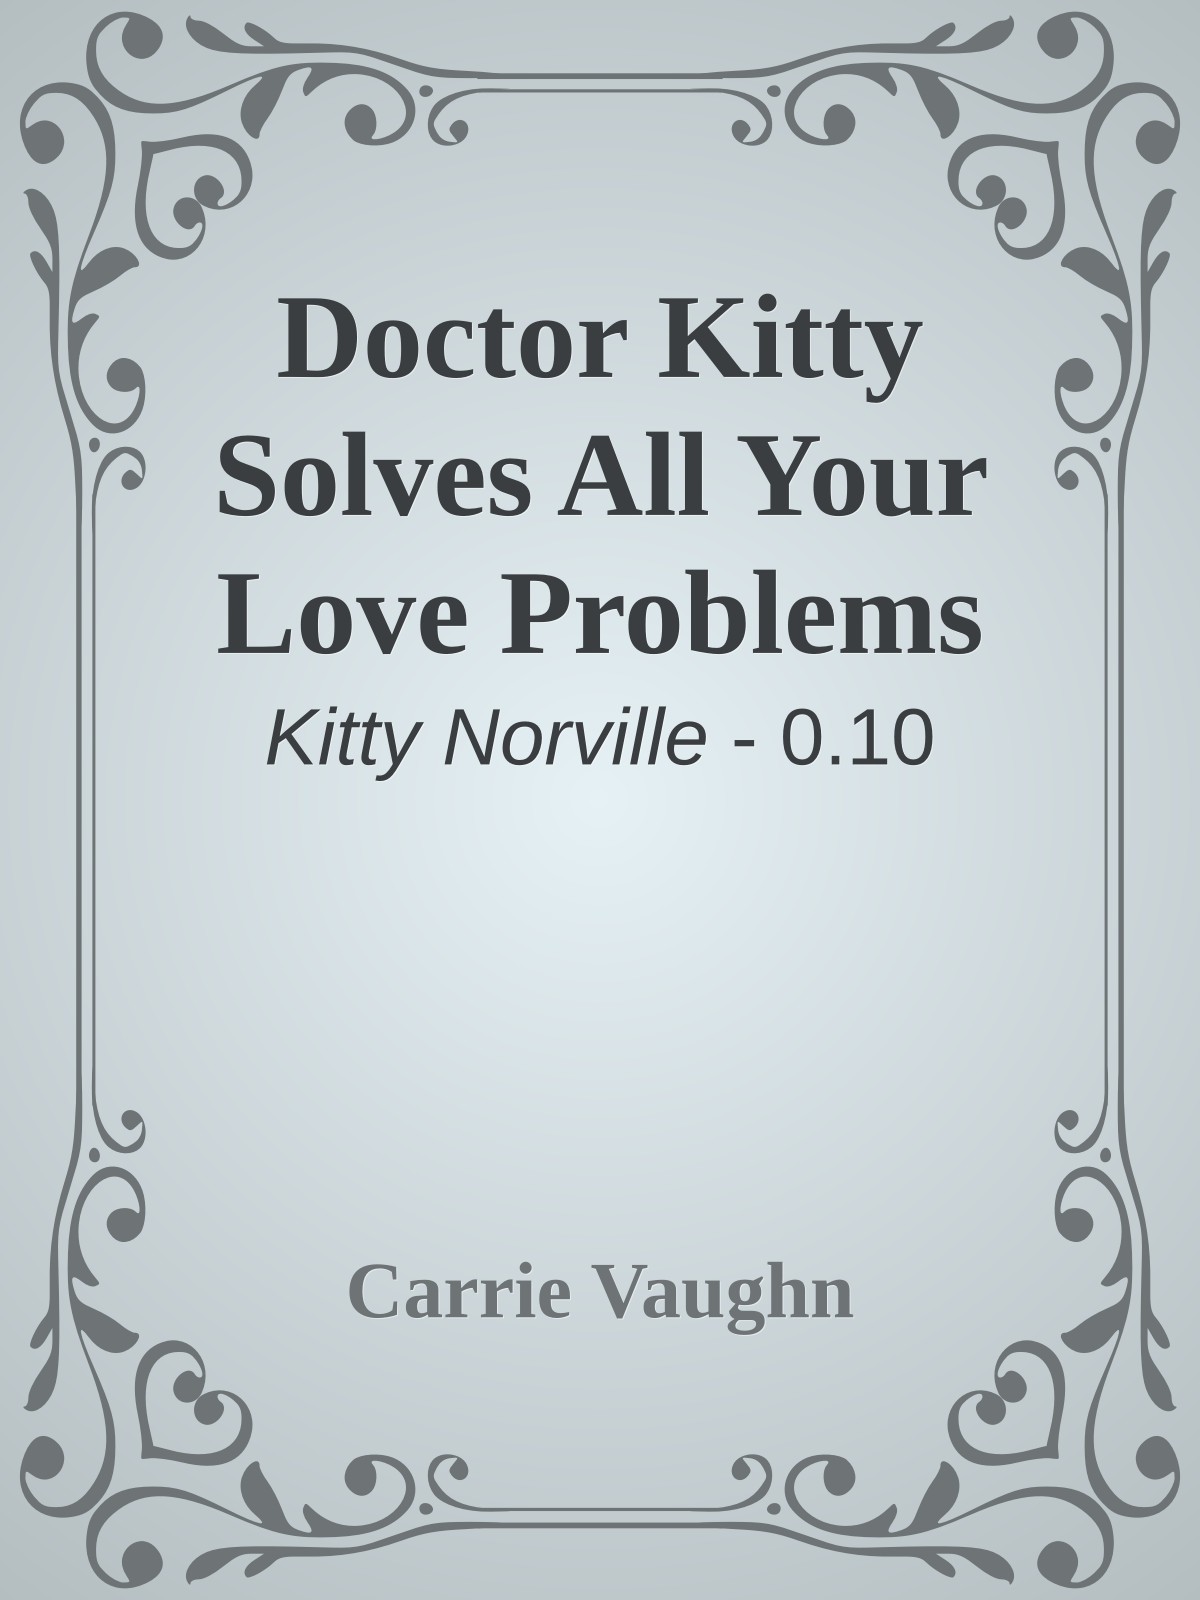 Doctor Kitty Solves All Your Love Problems